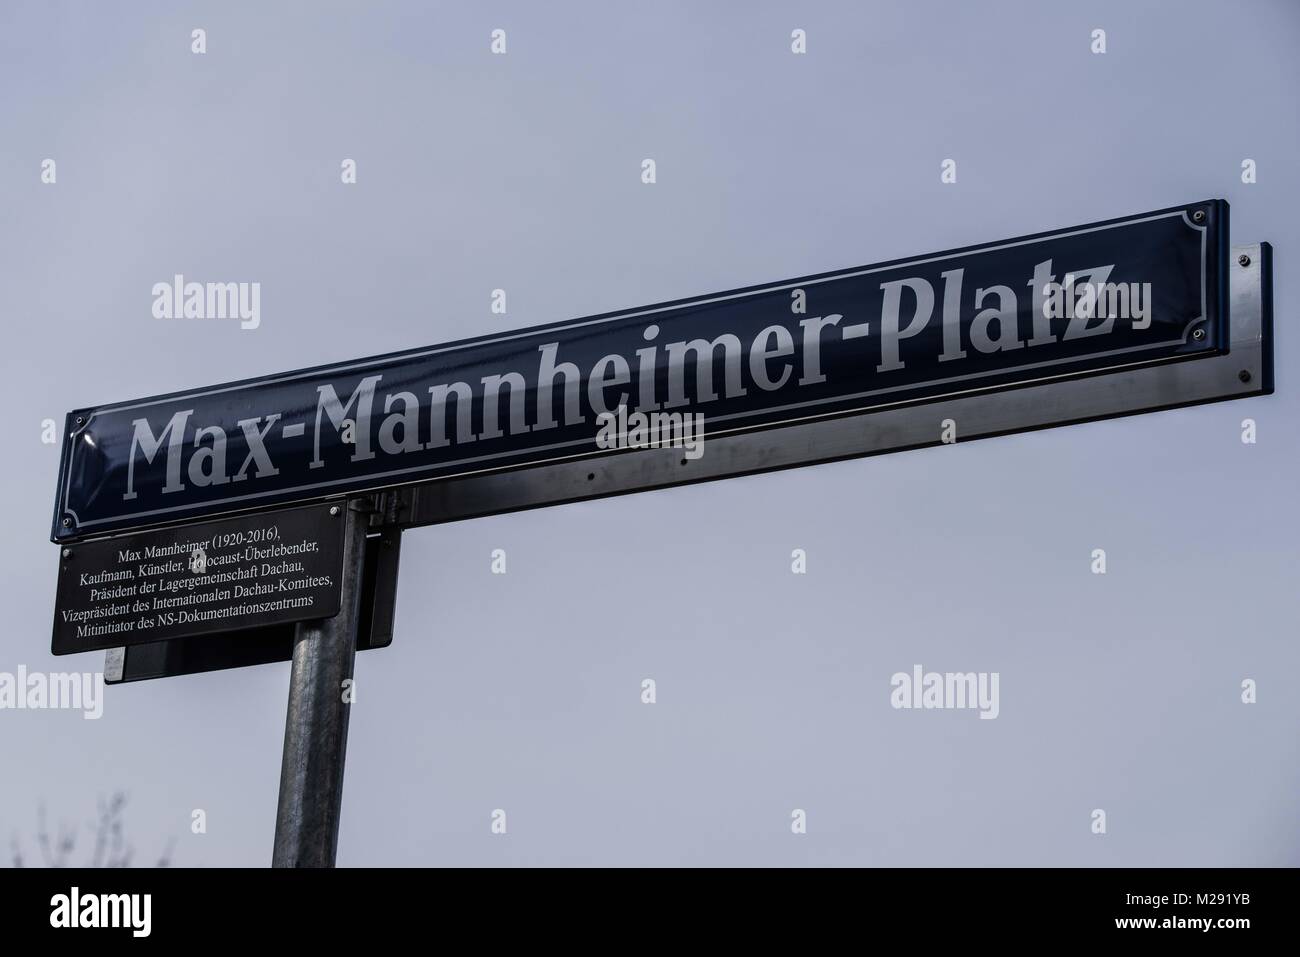 Munich, Bavaria, Germany. 6th Feb, 2018. The City of Munich, Germany dedicated the plaza adjacent to the National Socialism Documentation Center (NS-Dokumentationszentrum) building to Holocaust survivor Max Mannheimer. Mannheimer was an author, painter, and prolific speaker about the experience. He and his brother were the only family members to survive. Mannheimer was born on Feb. 6, 1920 in Northern Moravia and died on Sept. 23, 2016. nheimer. Notable att Credit: ZUMA Press, Inc./Alamy Live News Stock Photo